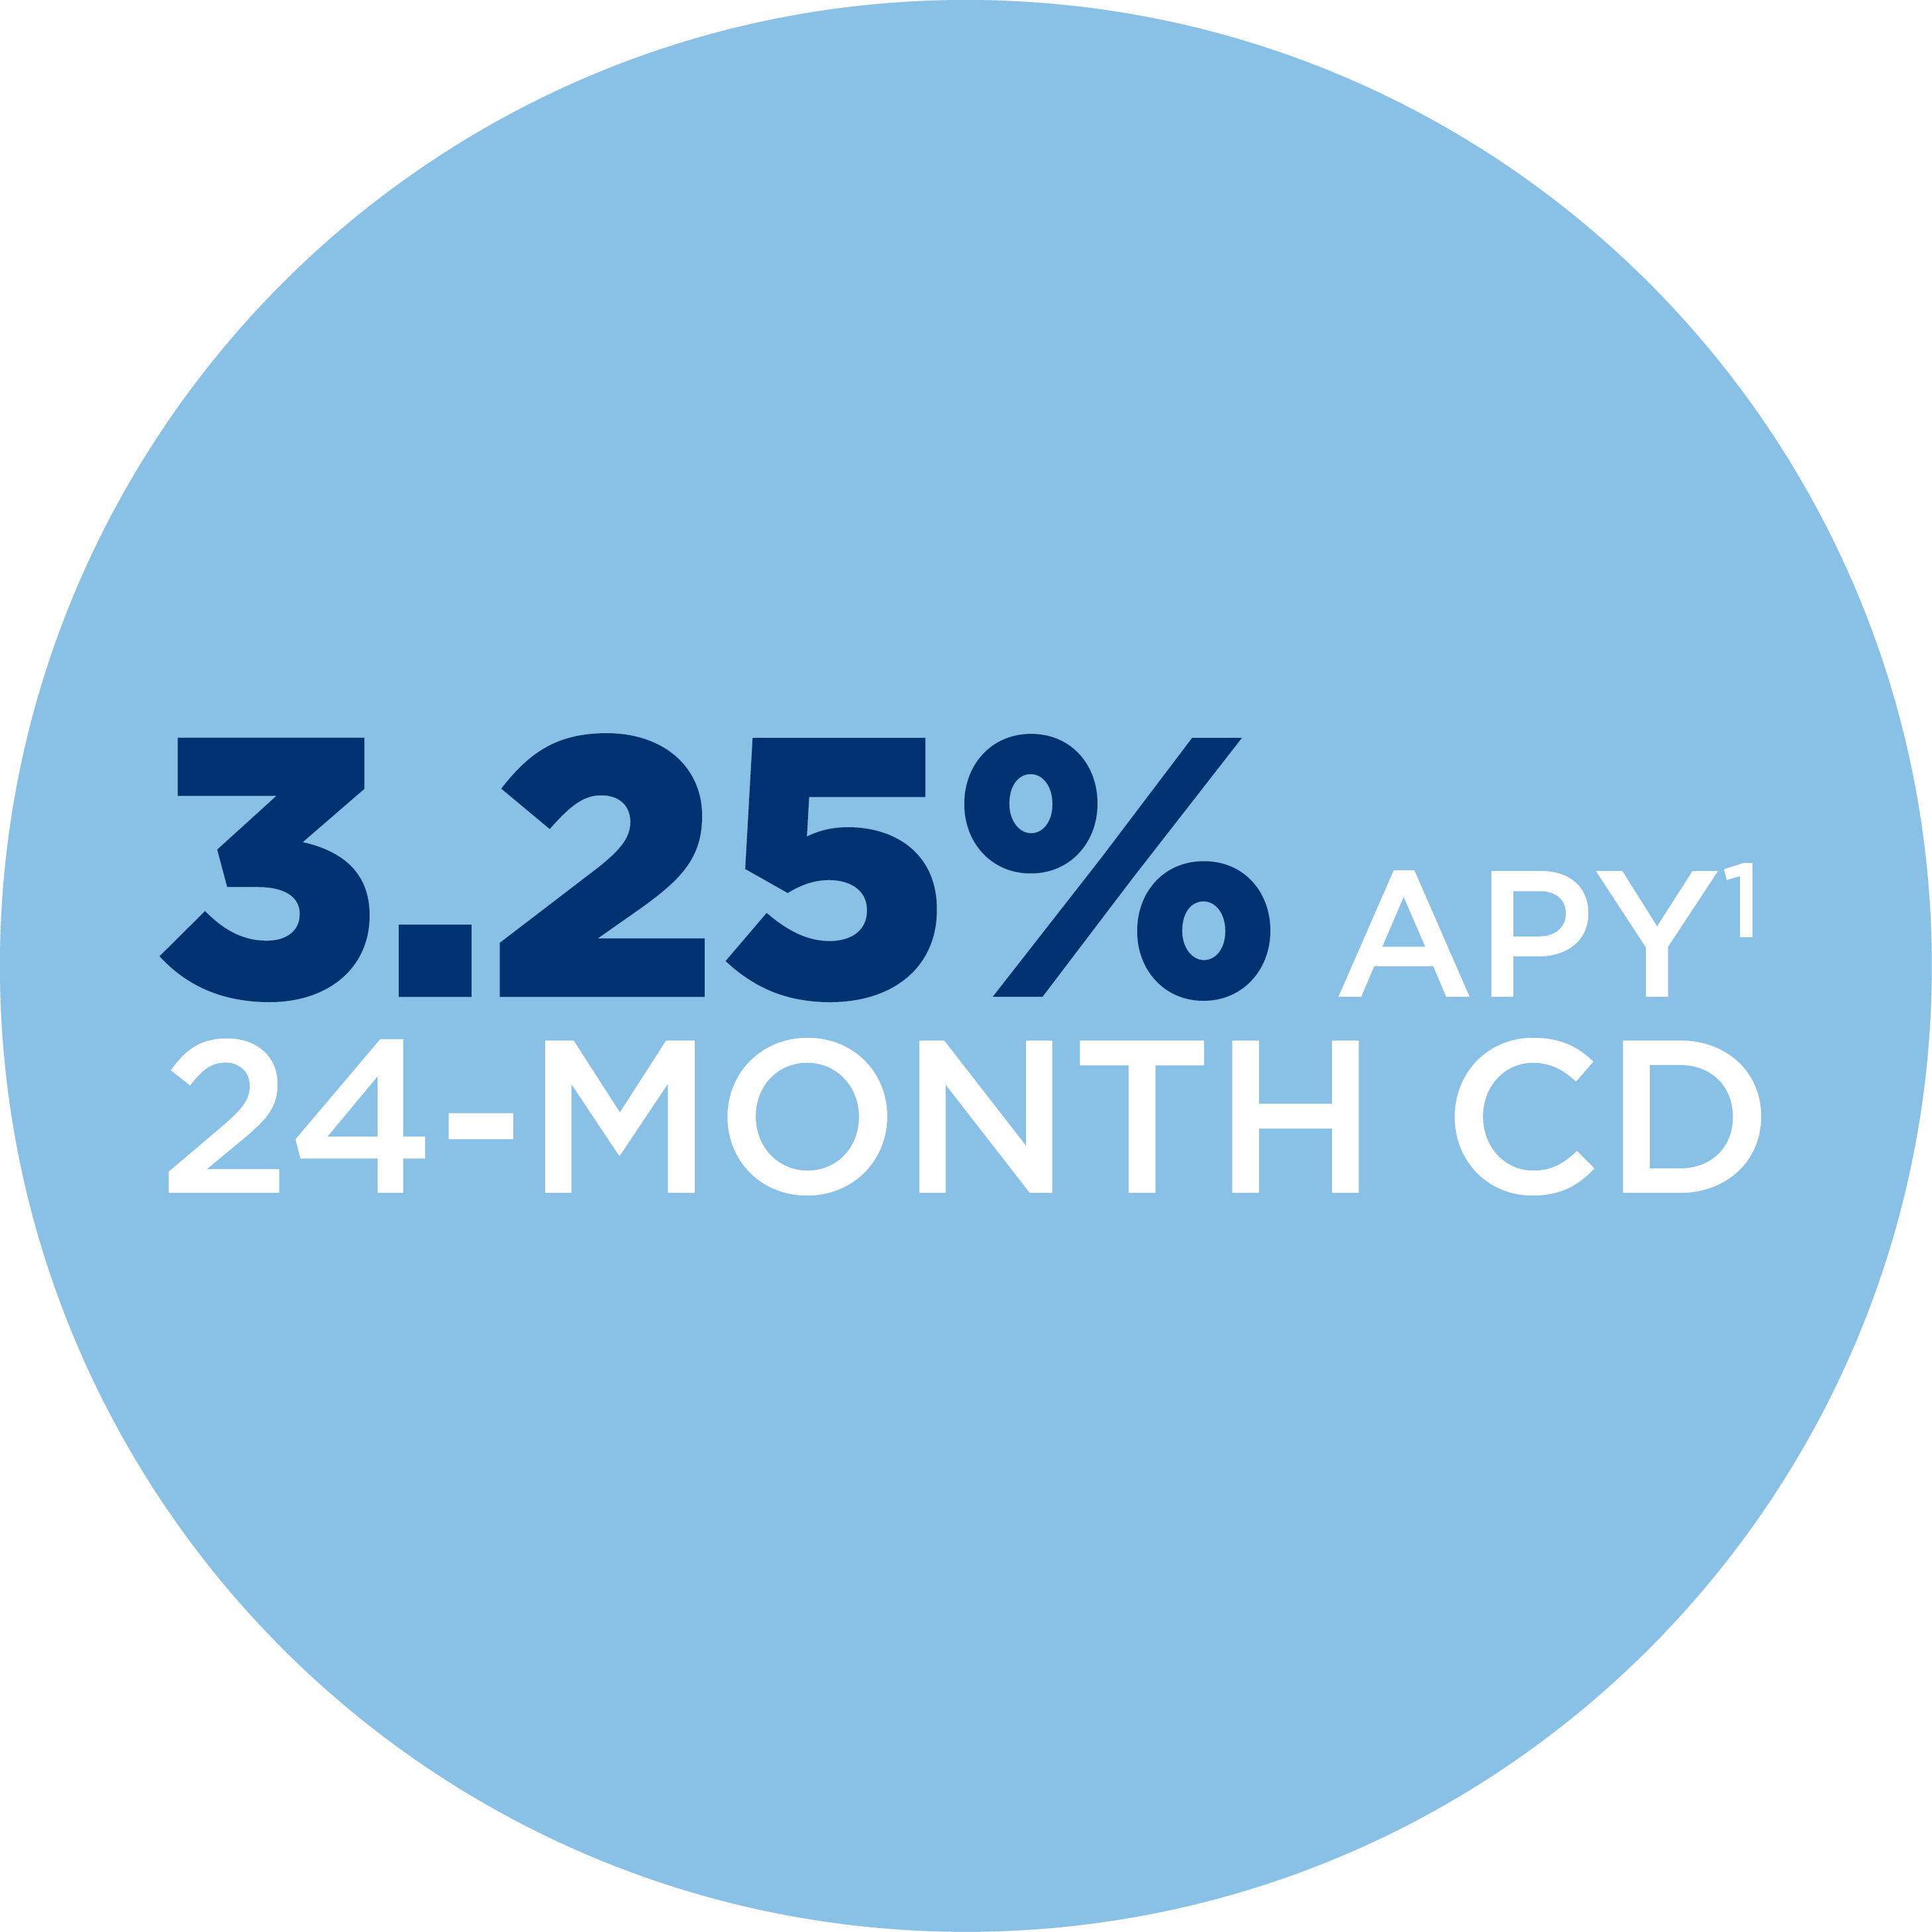 24 month cd promo rate of 3.25% APY